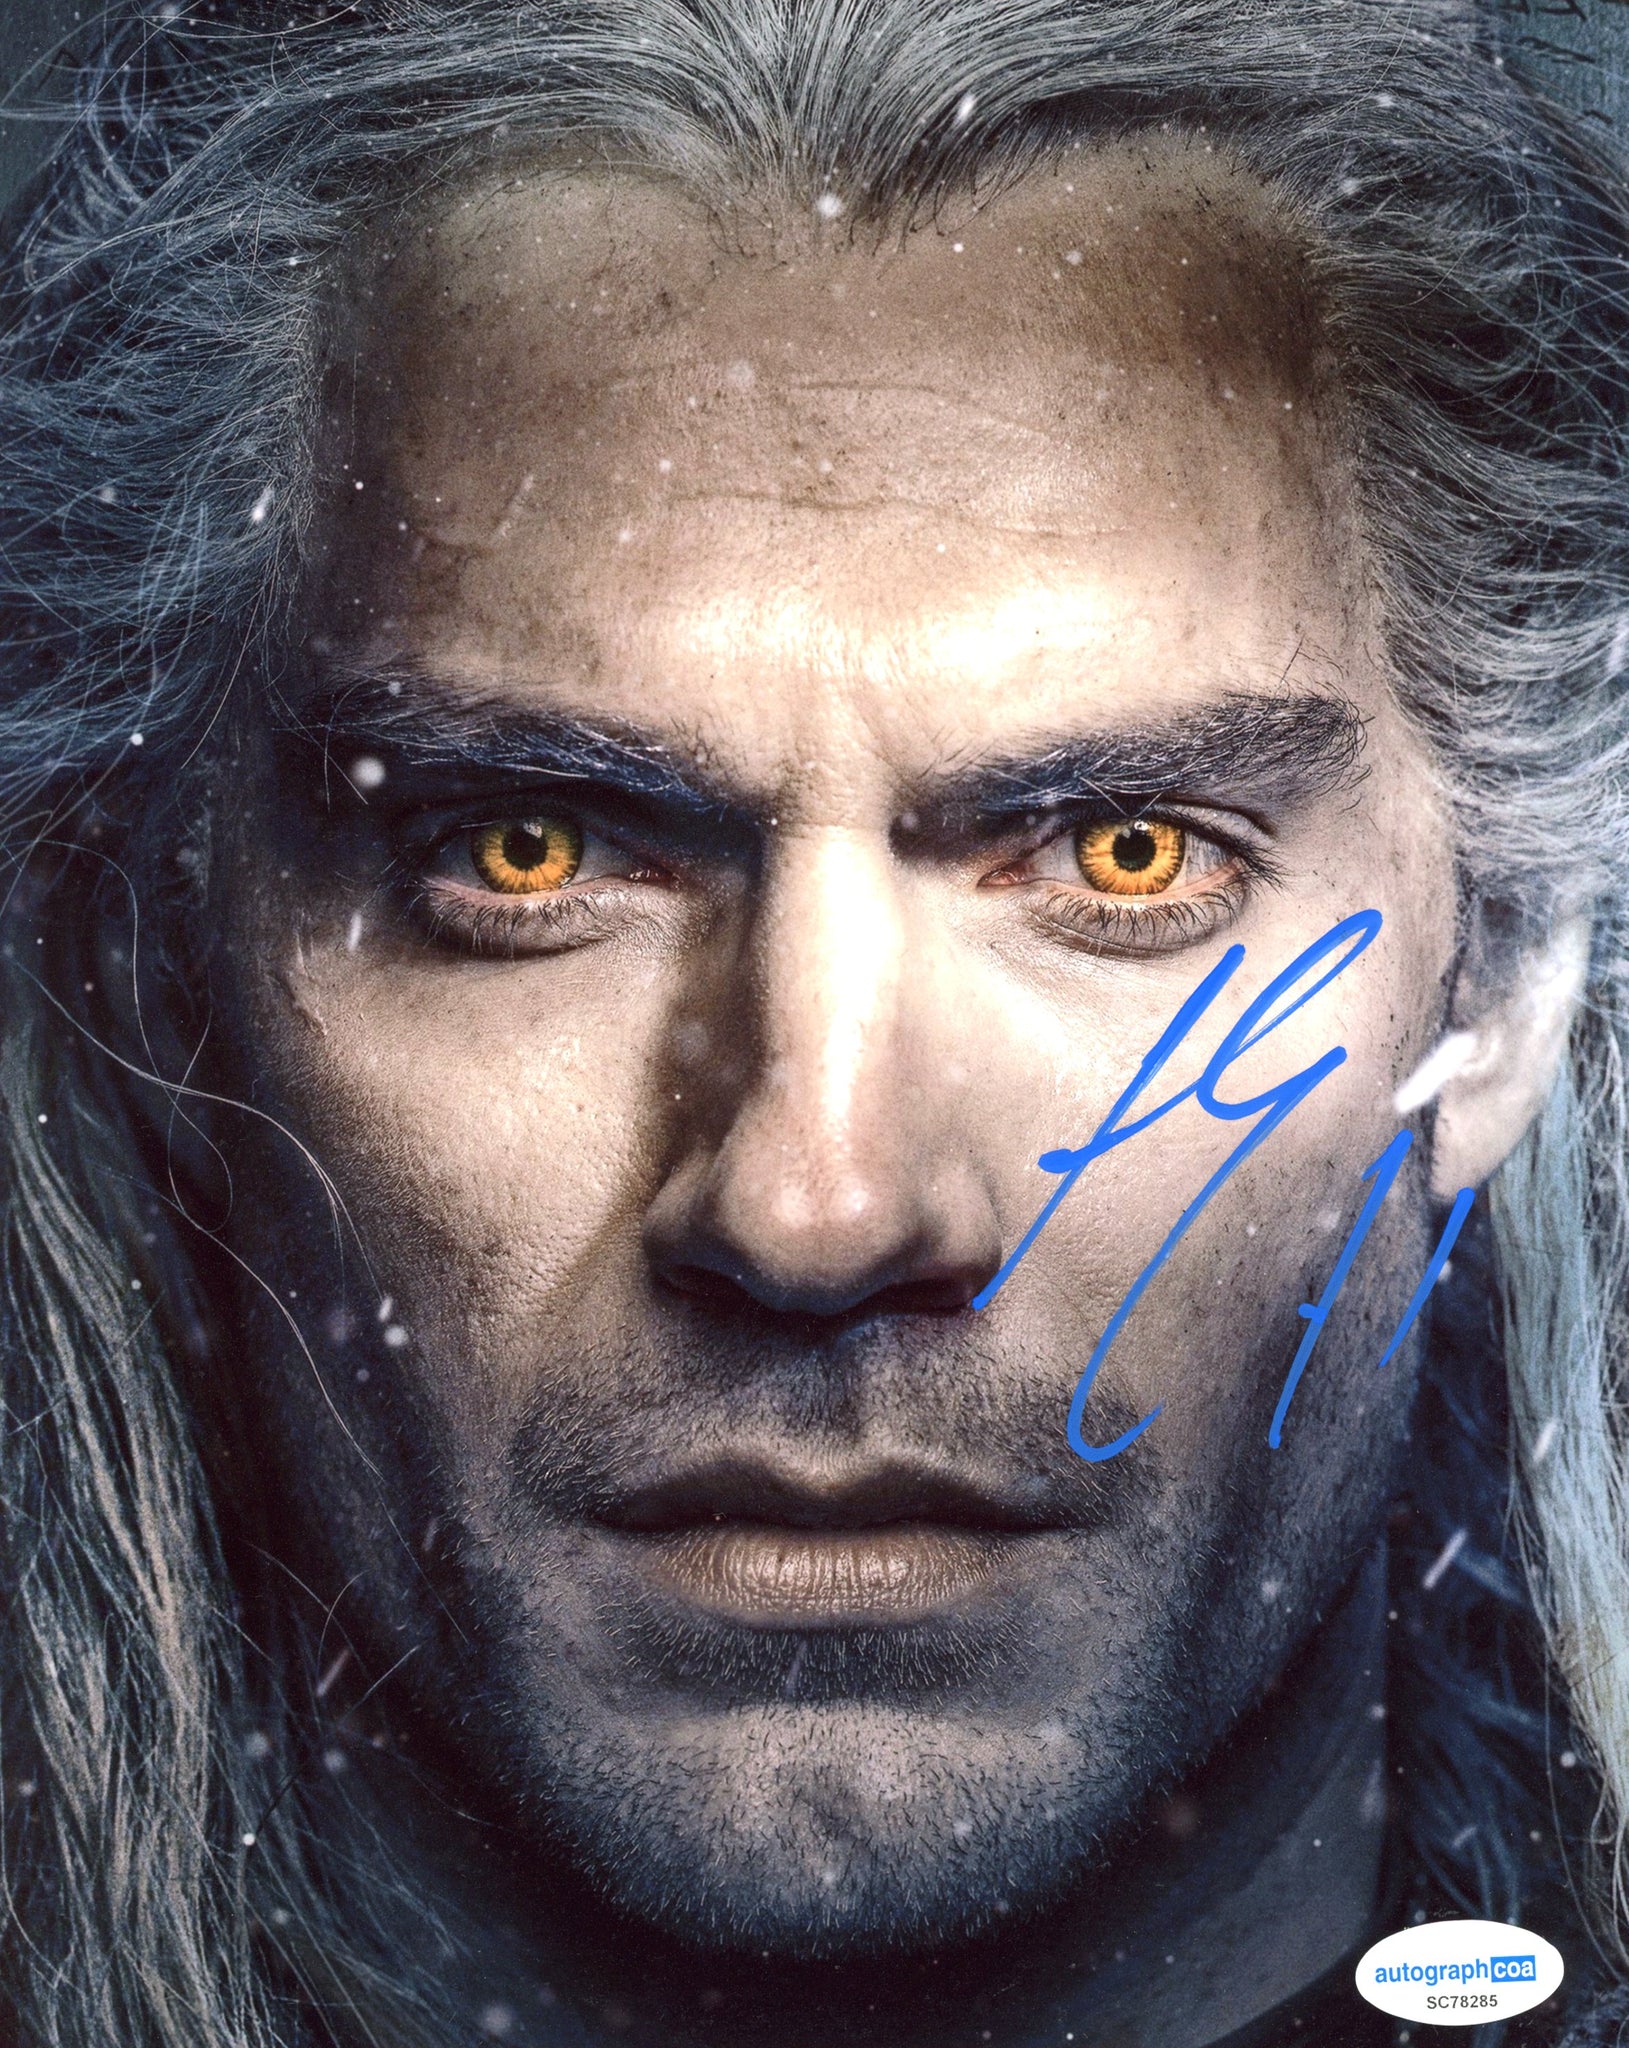 Henry Cavill Witcher Signed Autograph 8x10 Photo ACOA